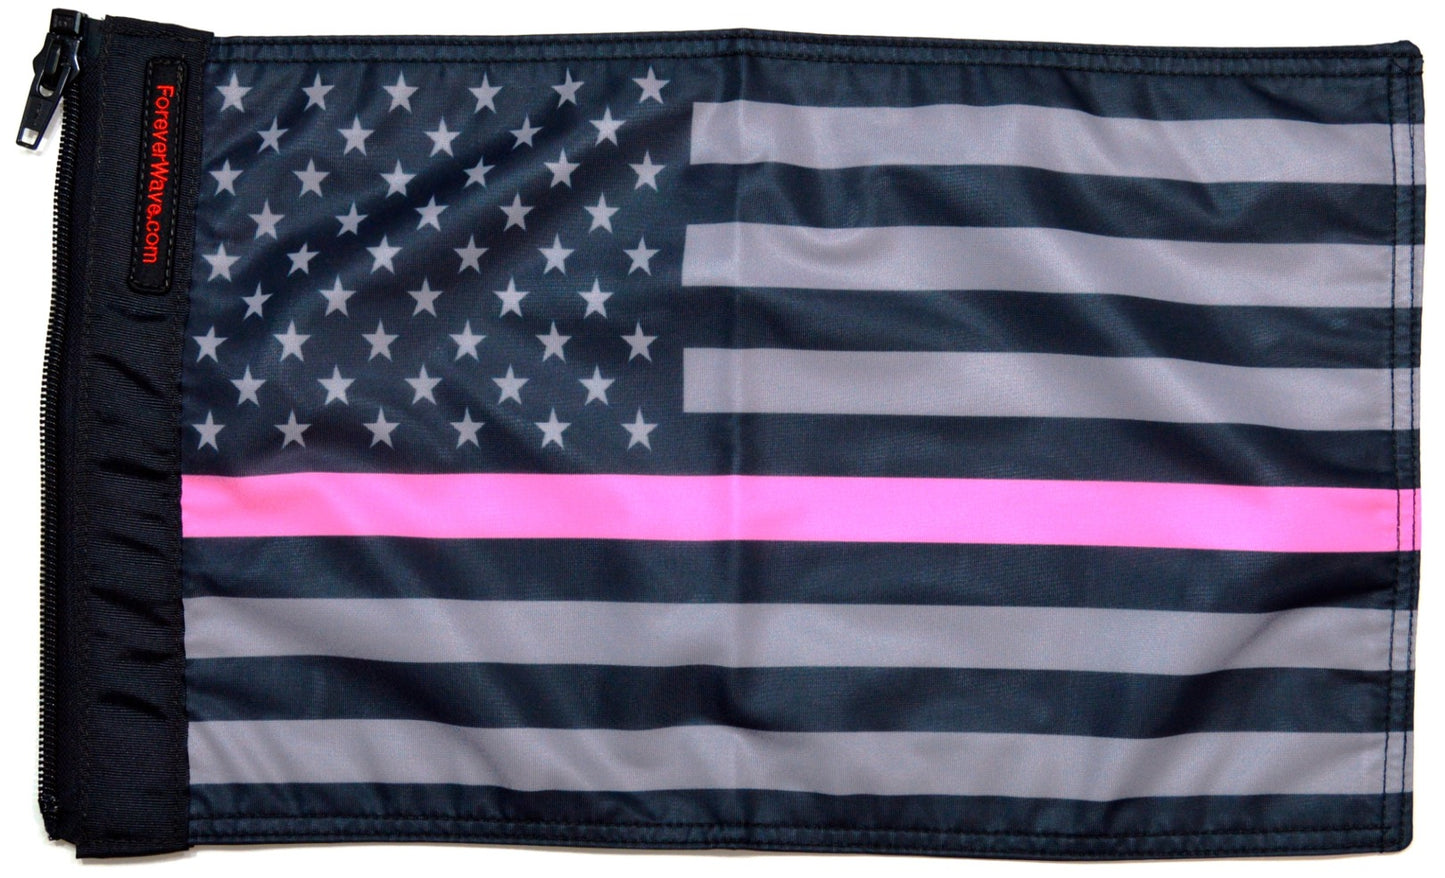 USA Subdued Thin Pink Line Flag Forever Wave 12”x18”